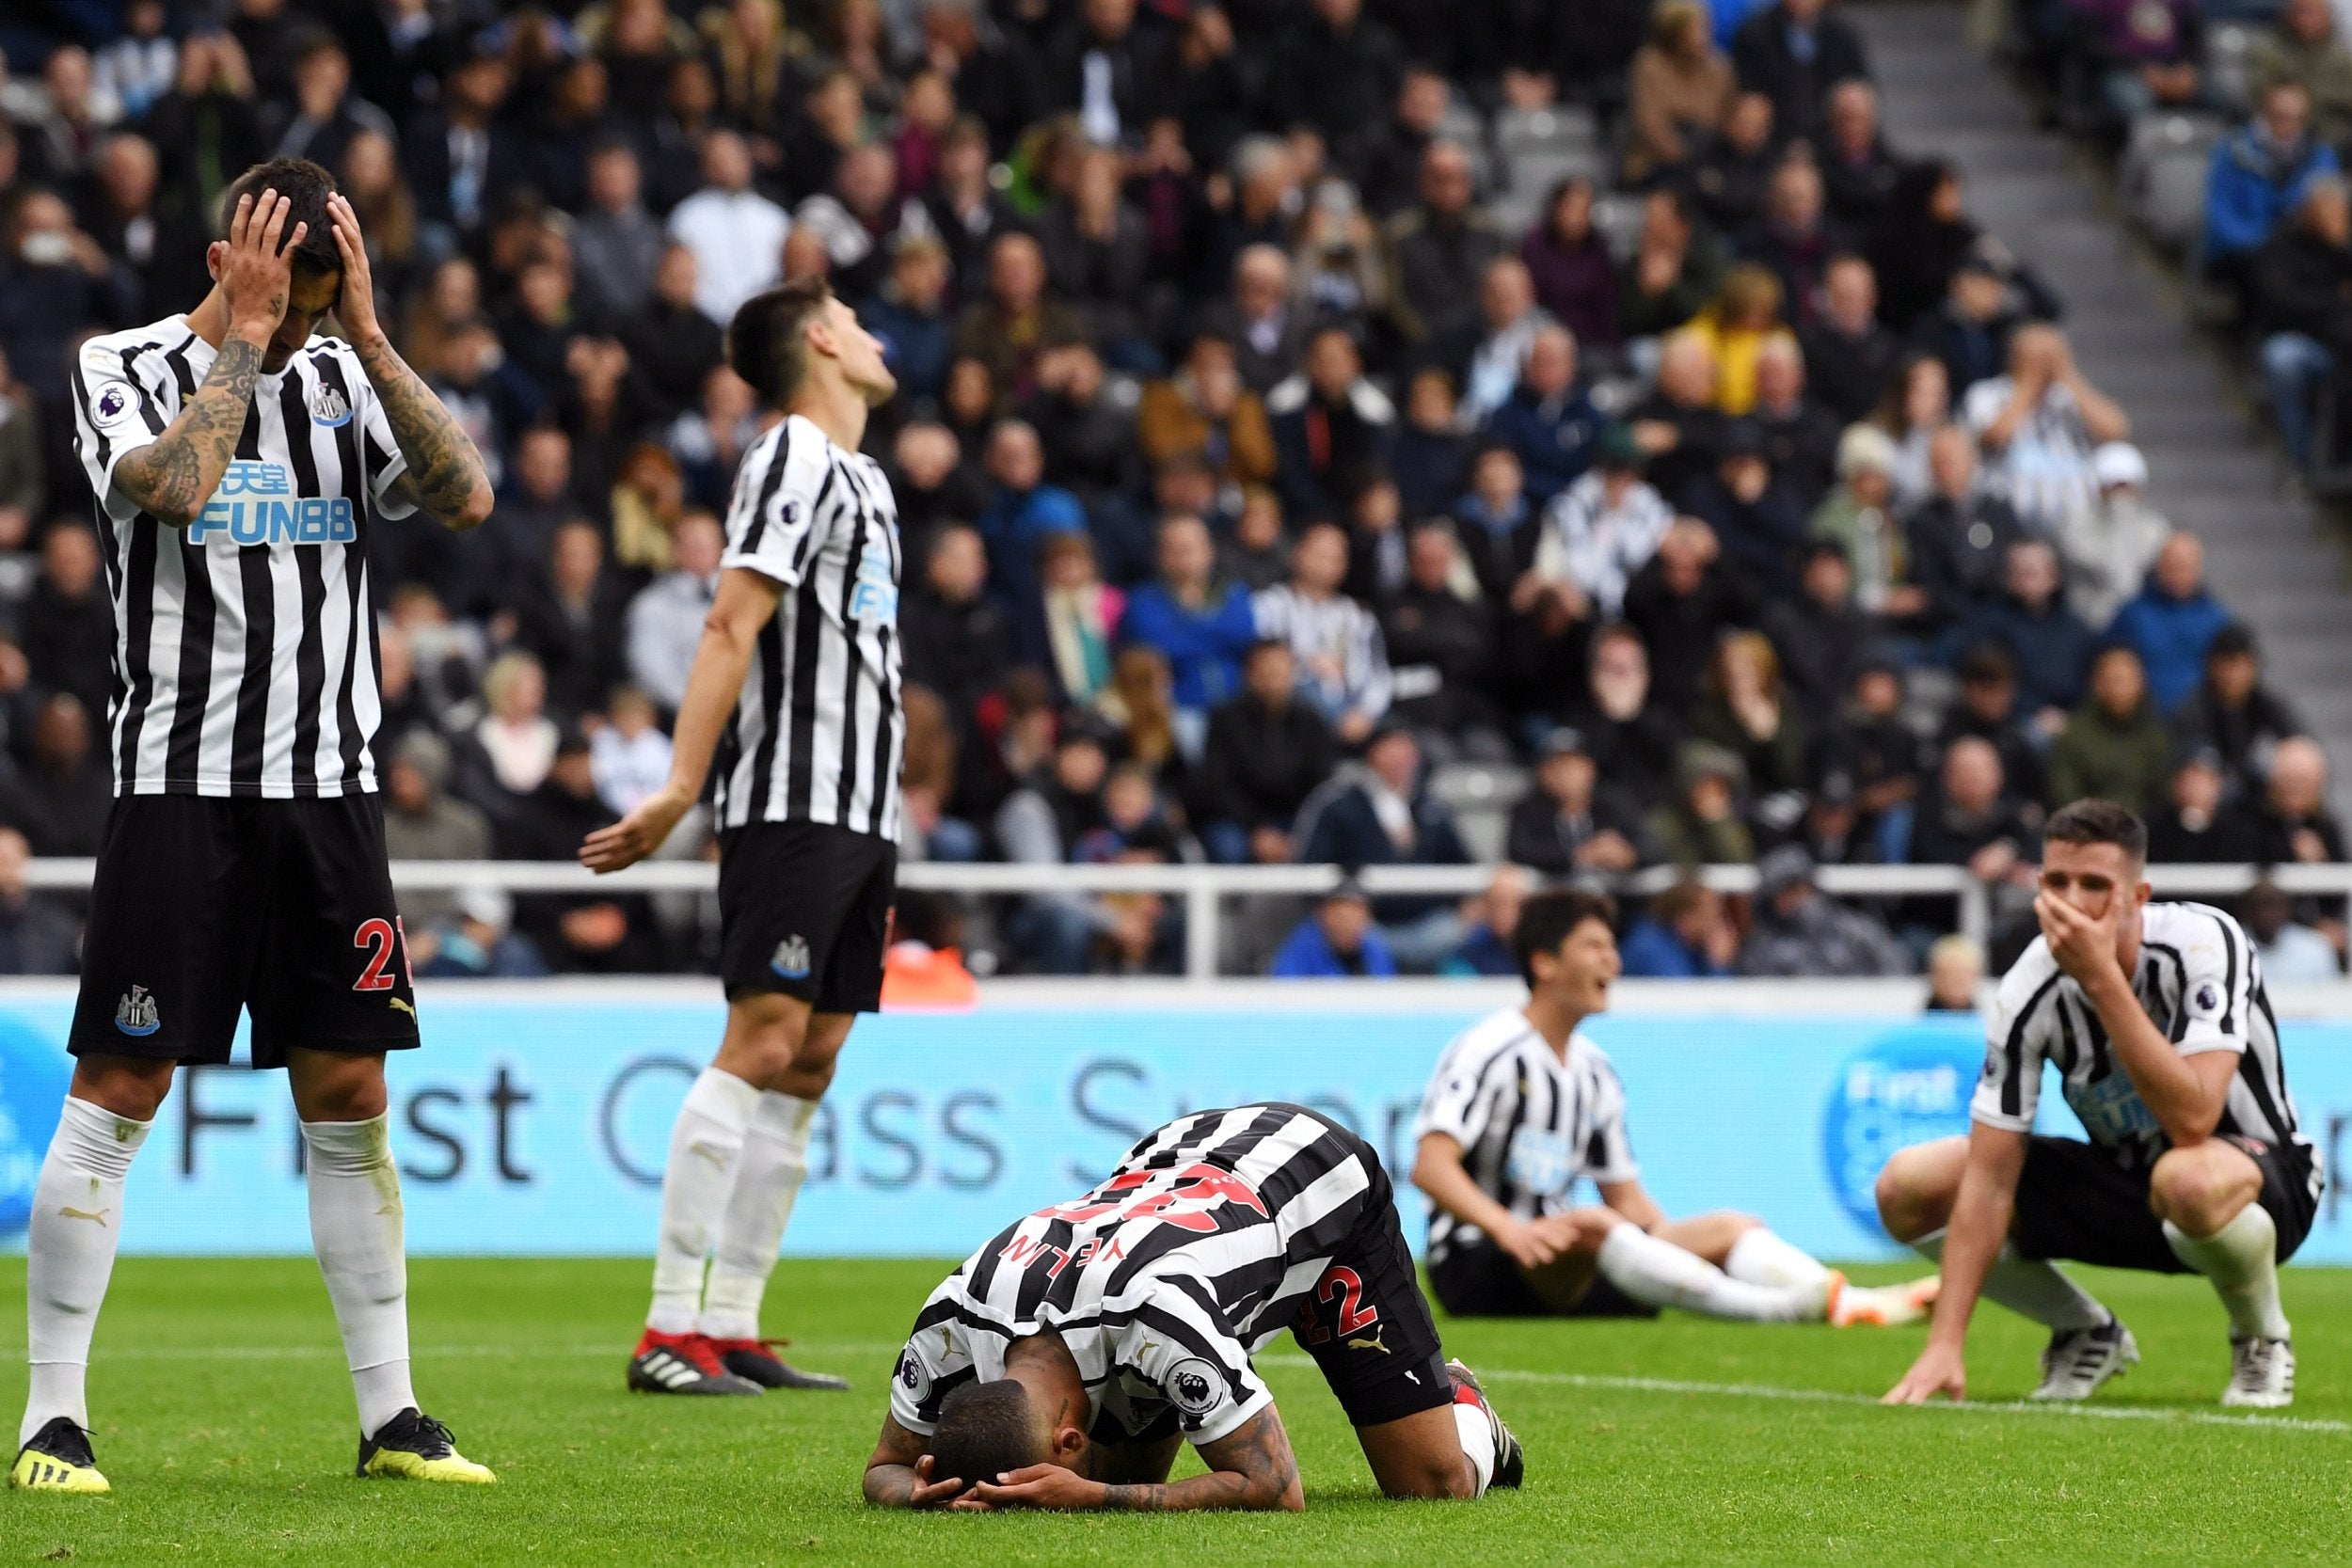 Newcastle were denied a point at the last on Sunday